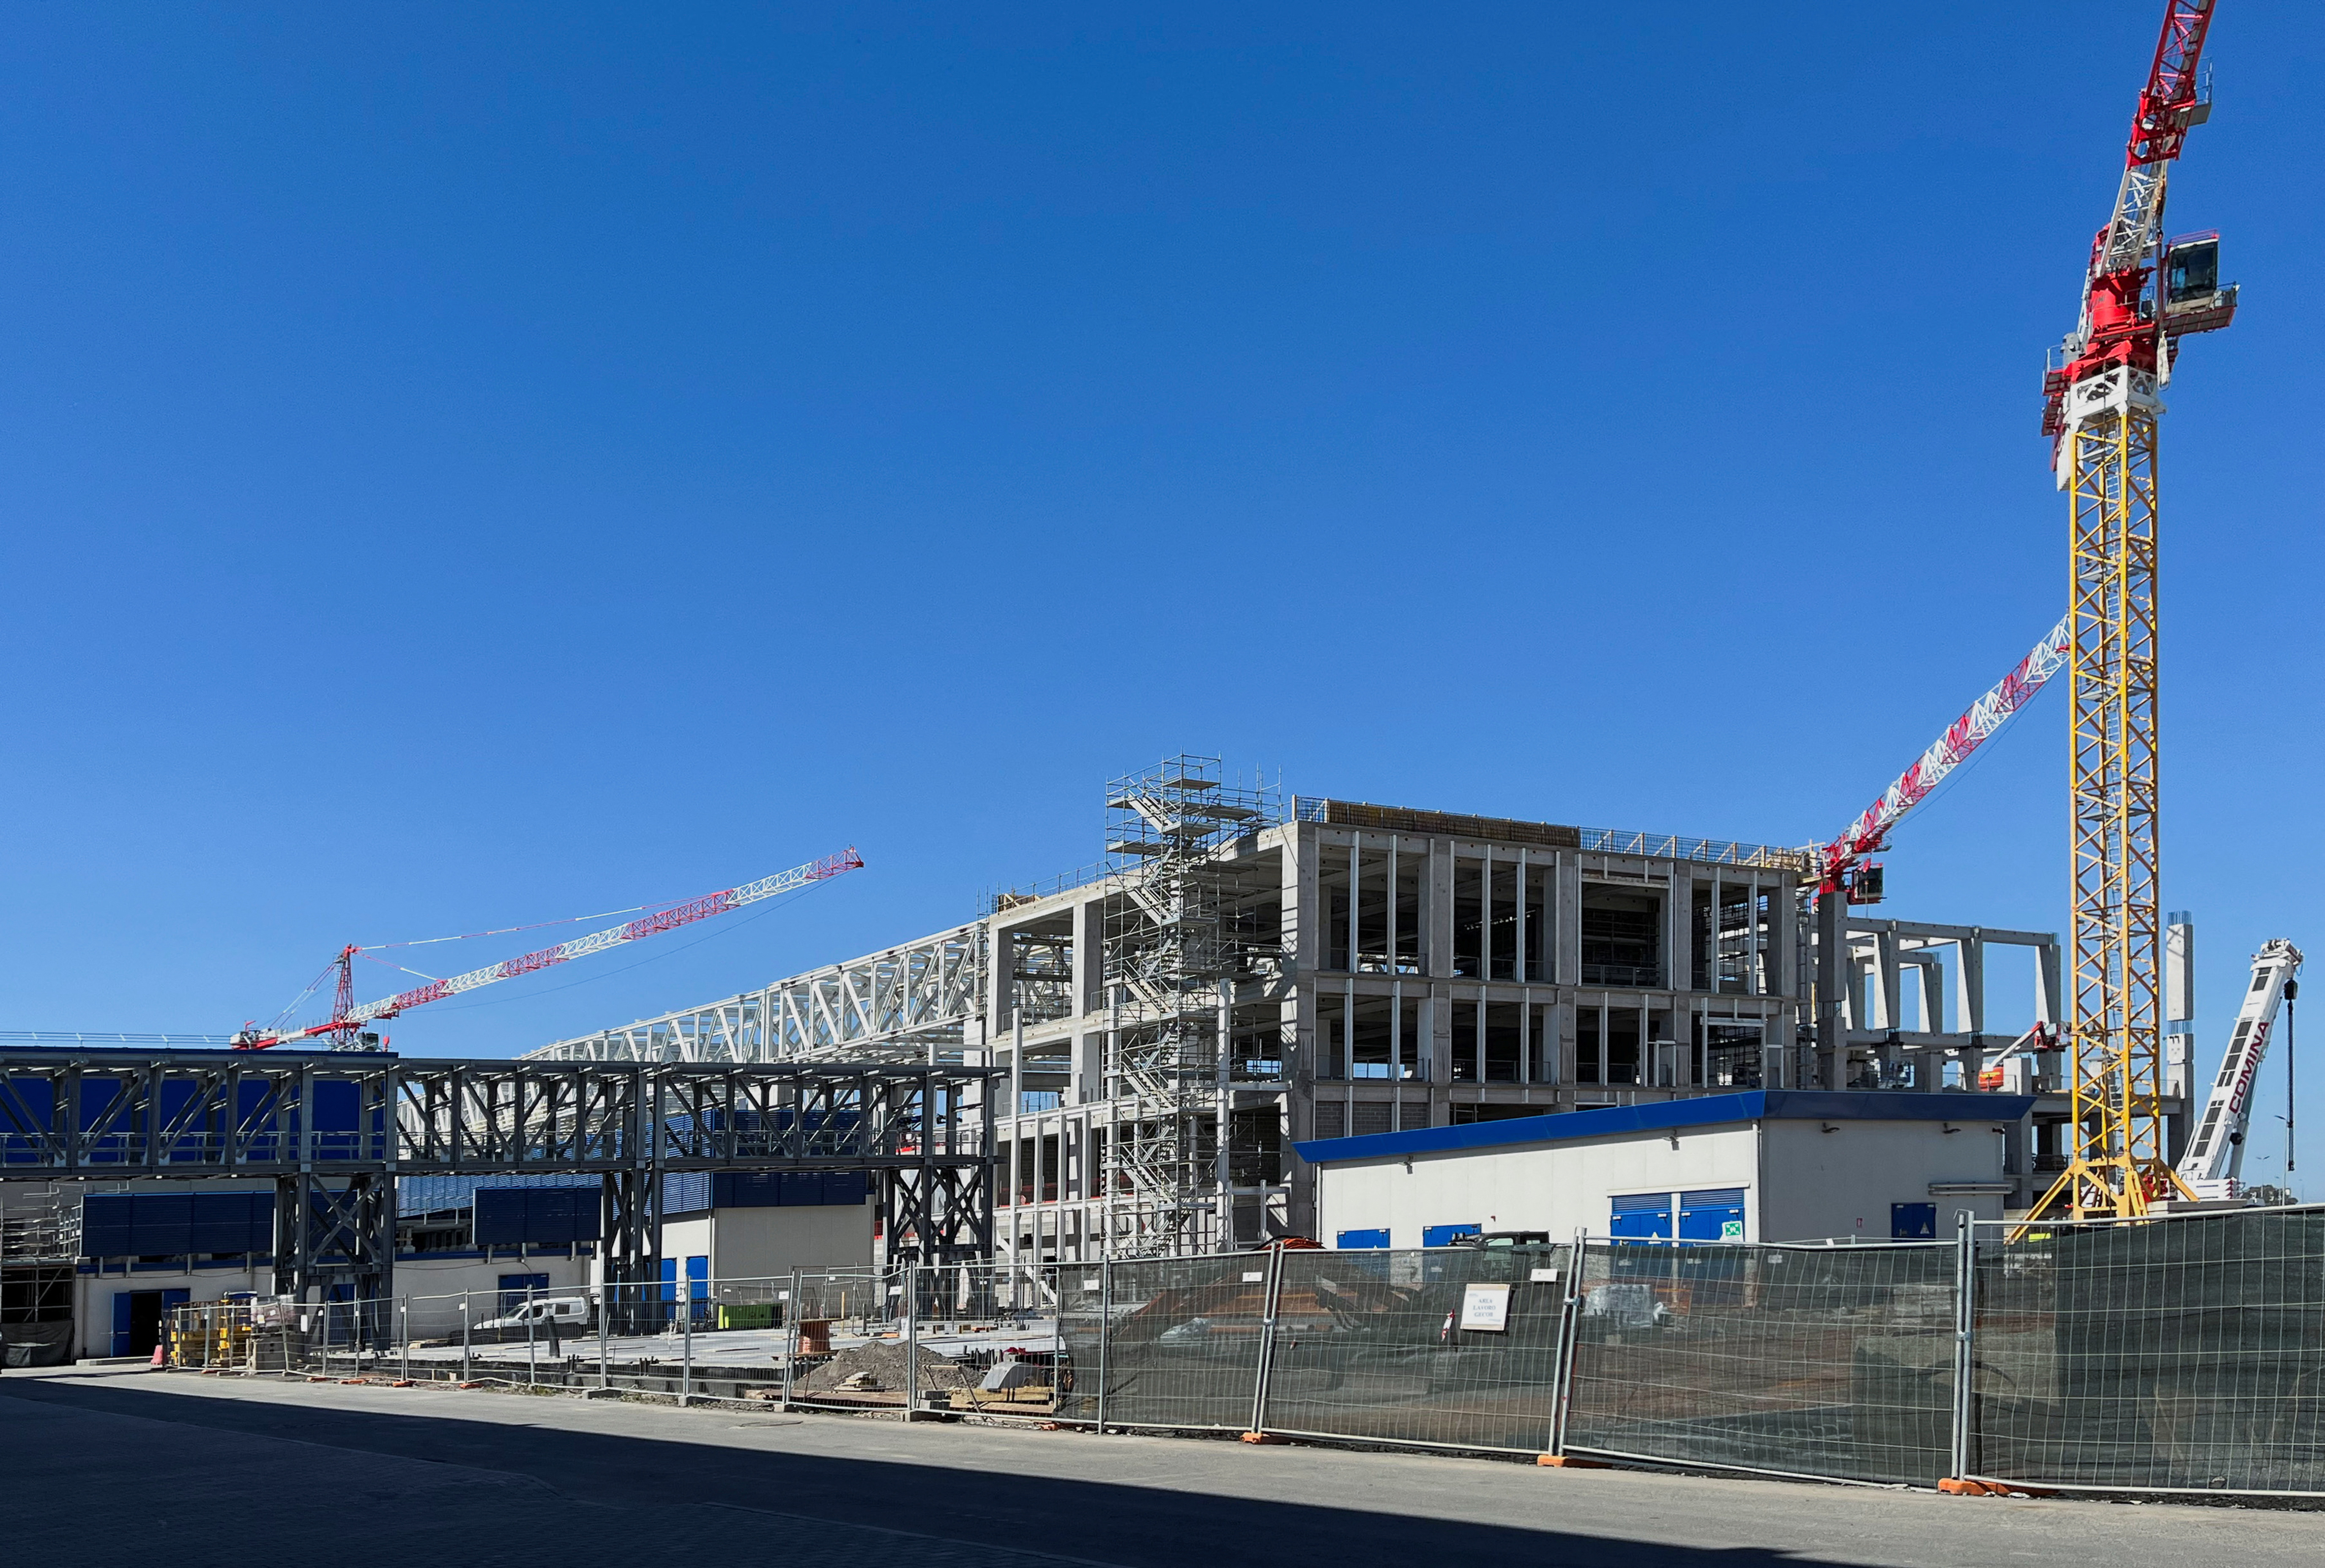 A building under construction is seen at an STMicroelectronics plant in Catania